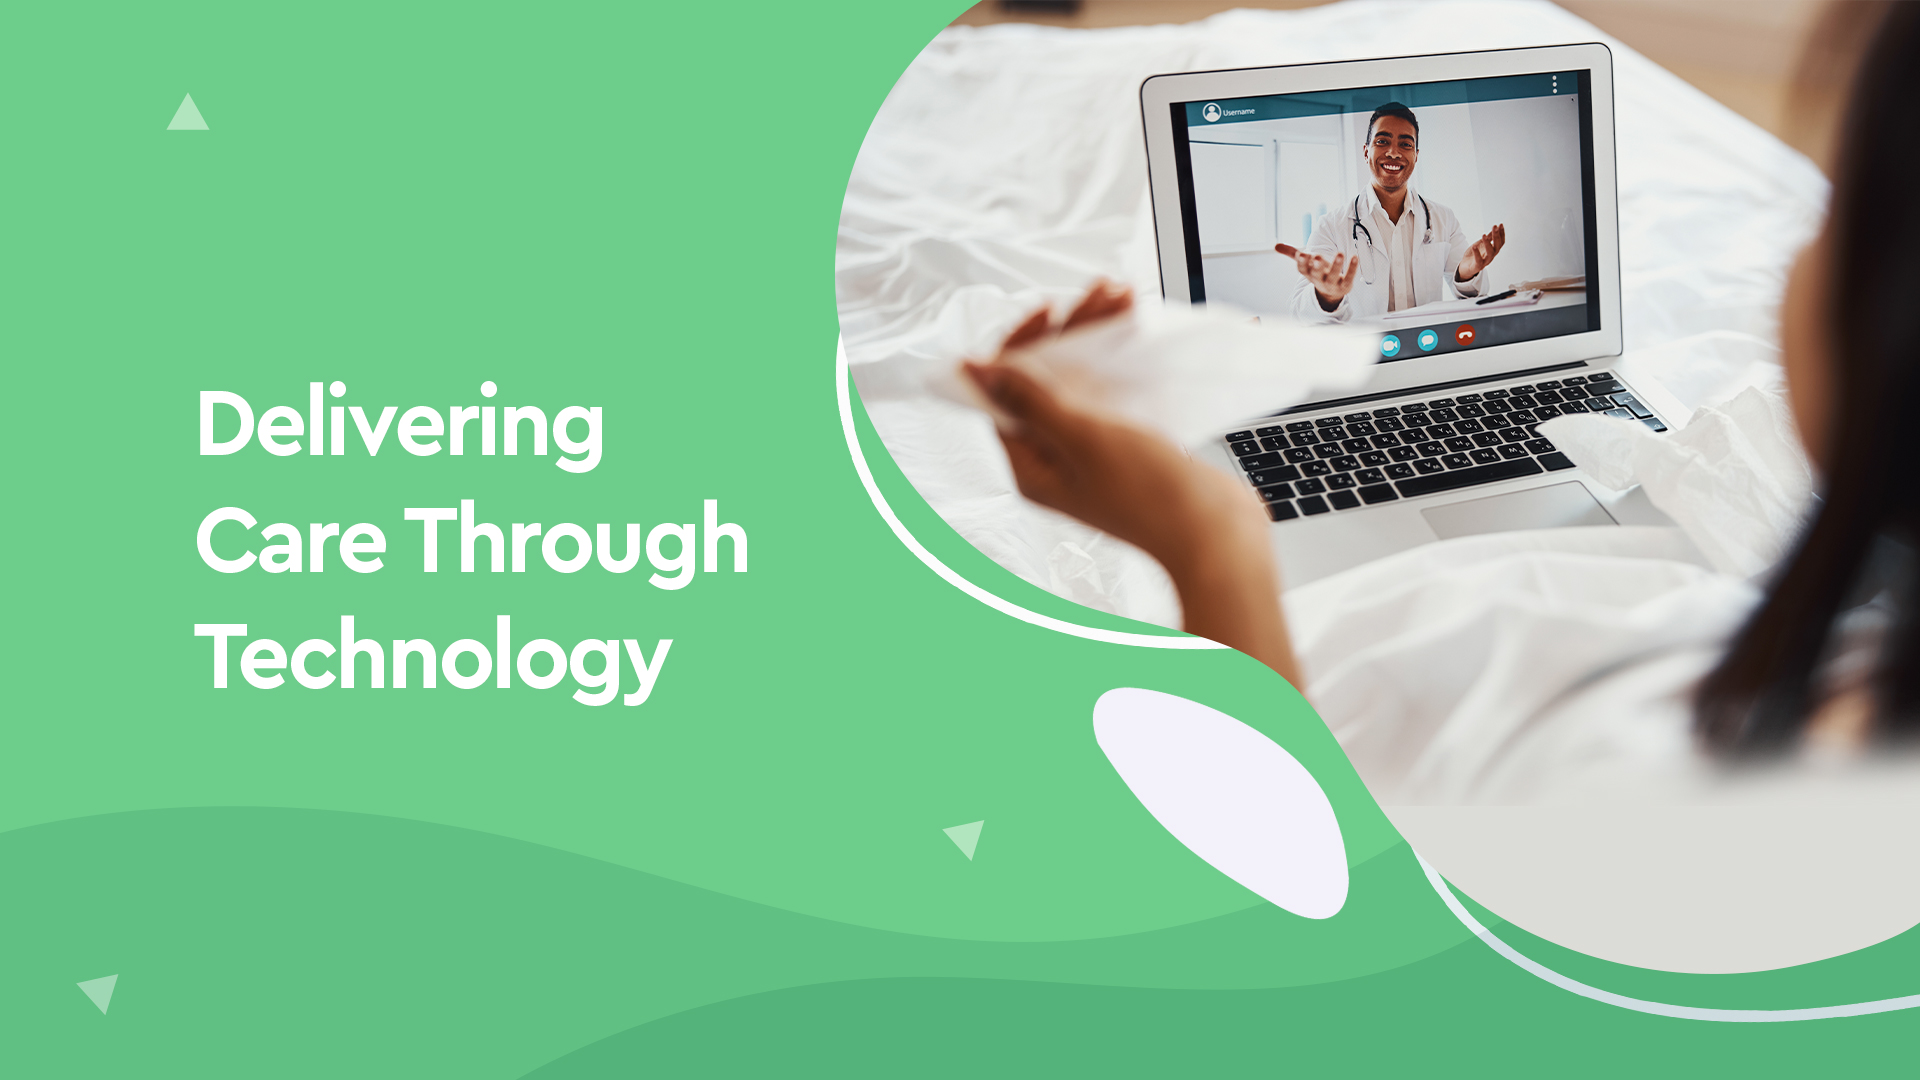 Delivering Care Through Technology